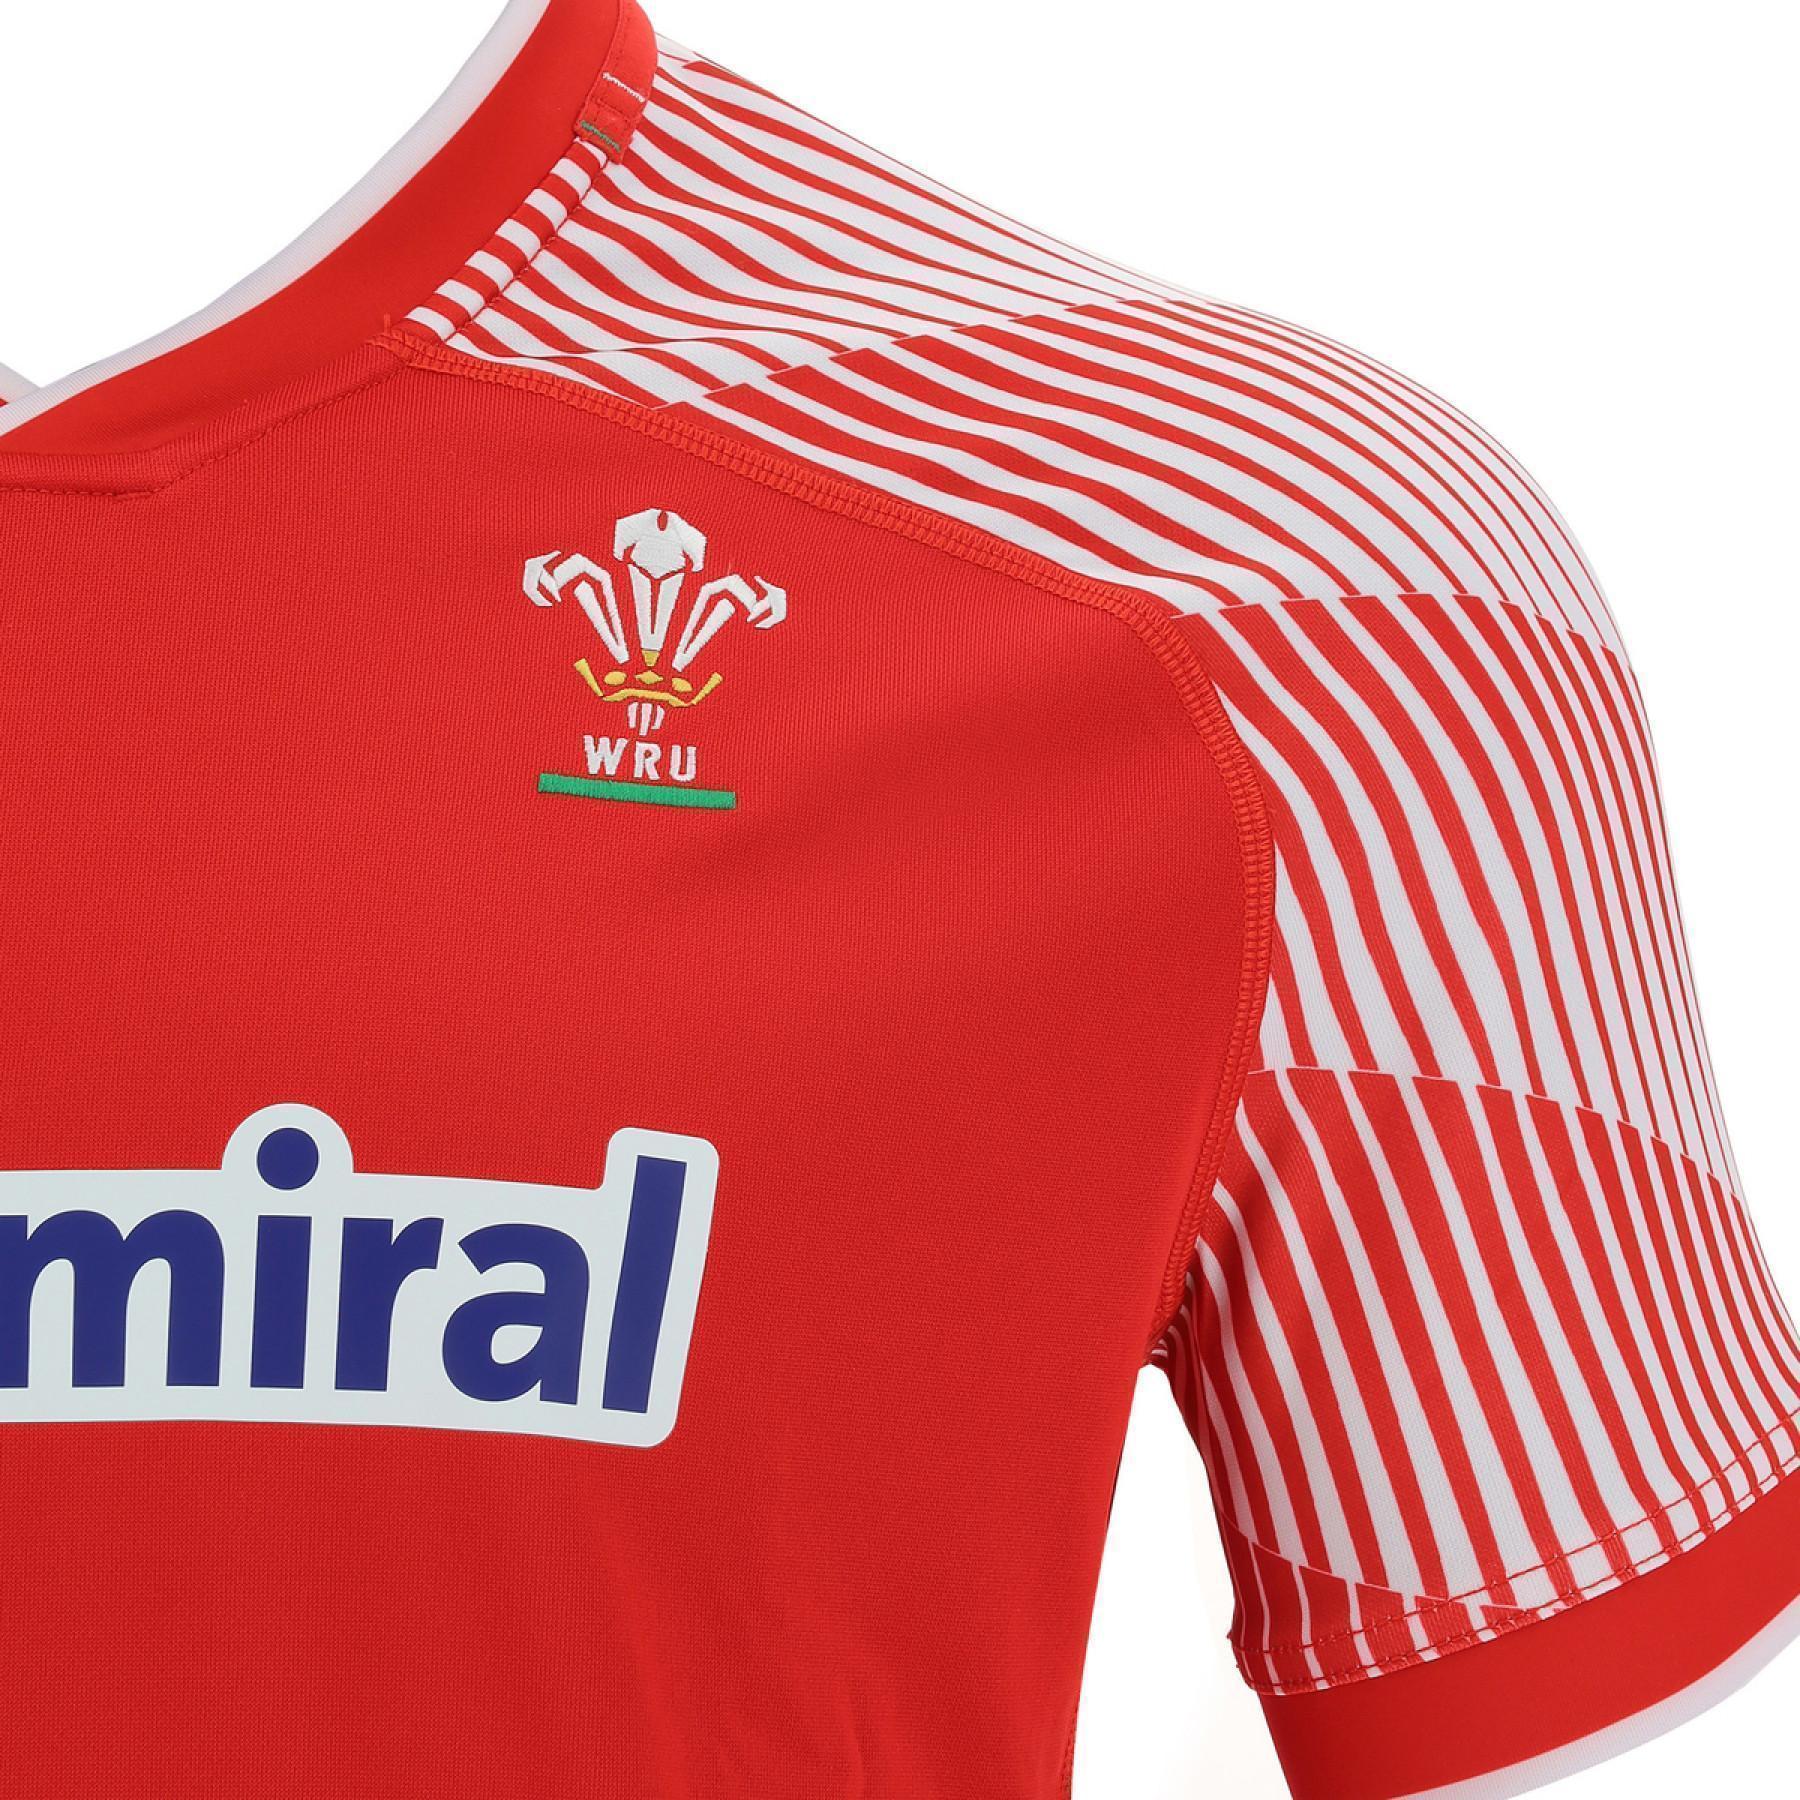 Camisola home Seven Pays de Galles rugby 2020/21